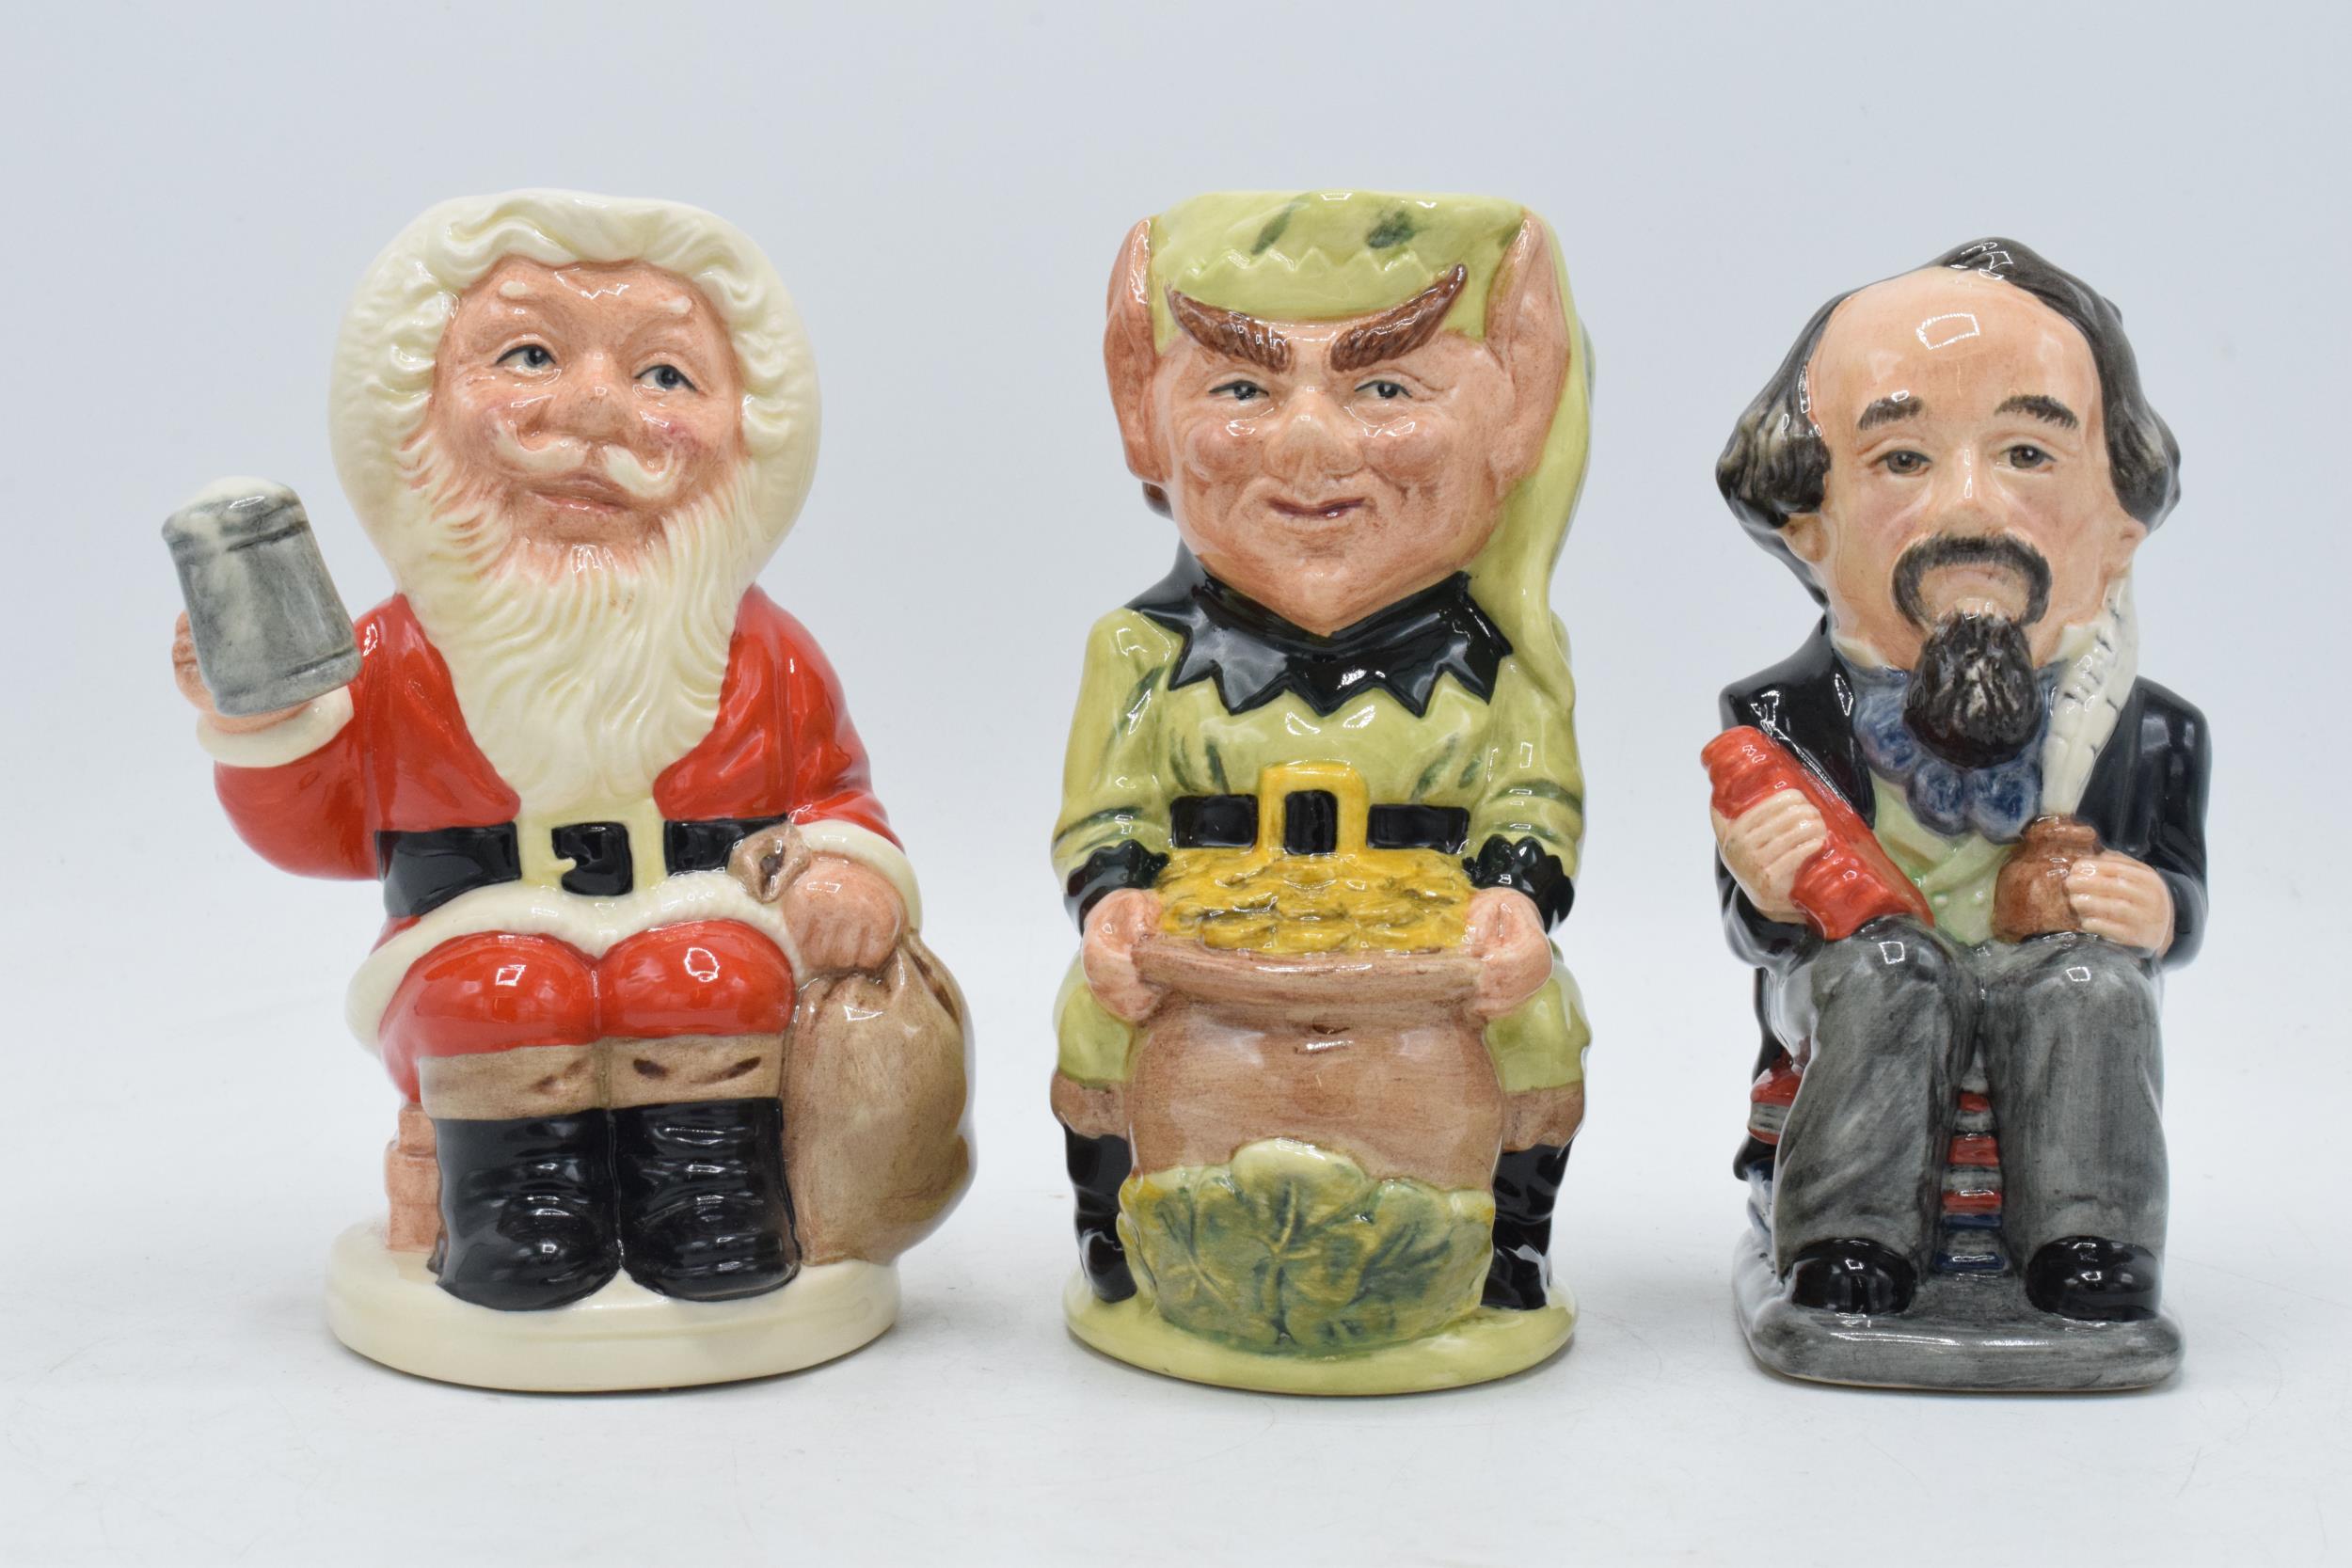 A trio of Royal Doulton Toby jugs to include Charles Dickens D6997, Leprechaun D6948 and Father